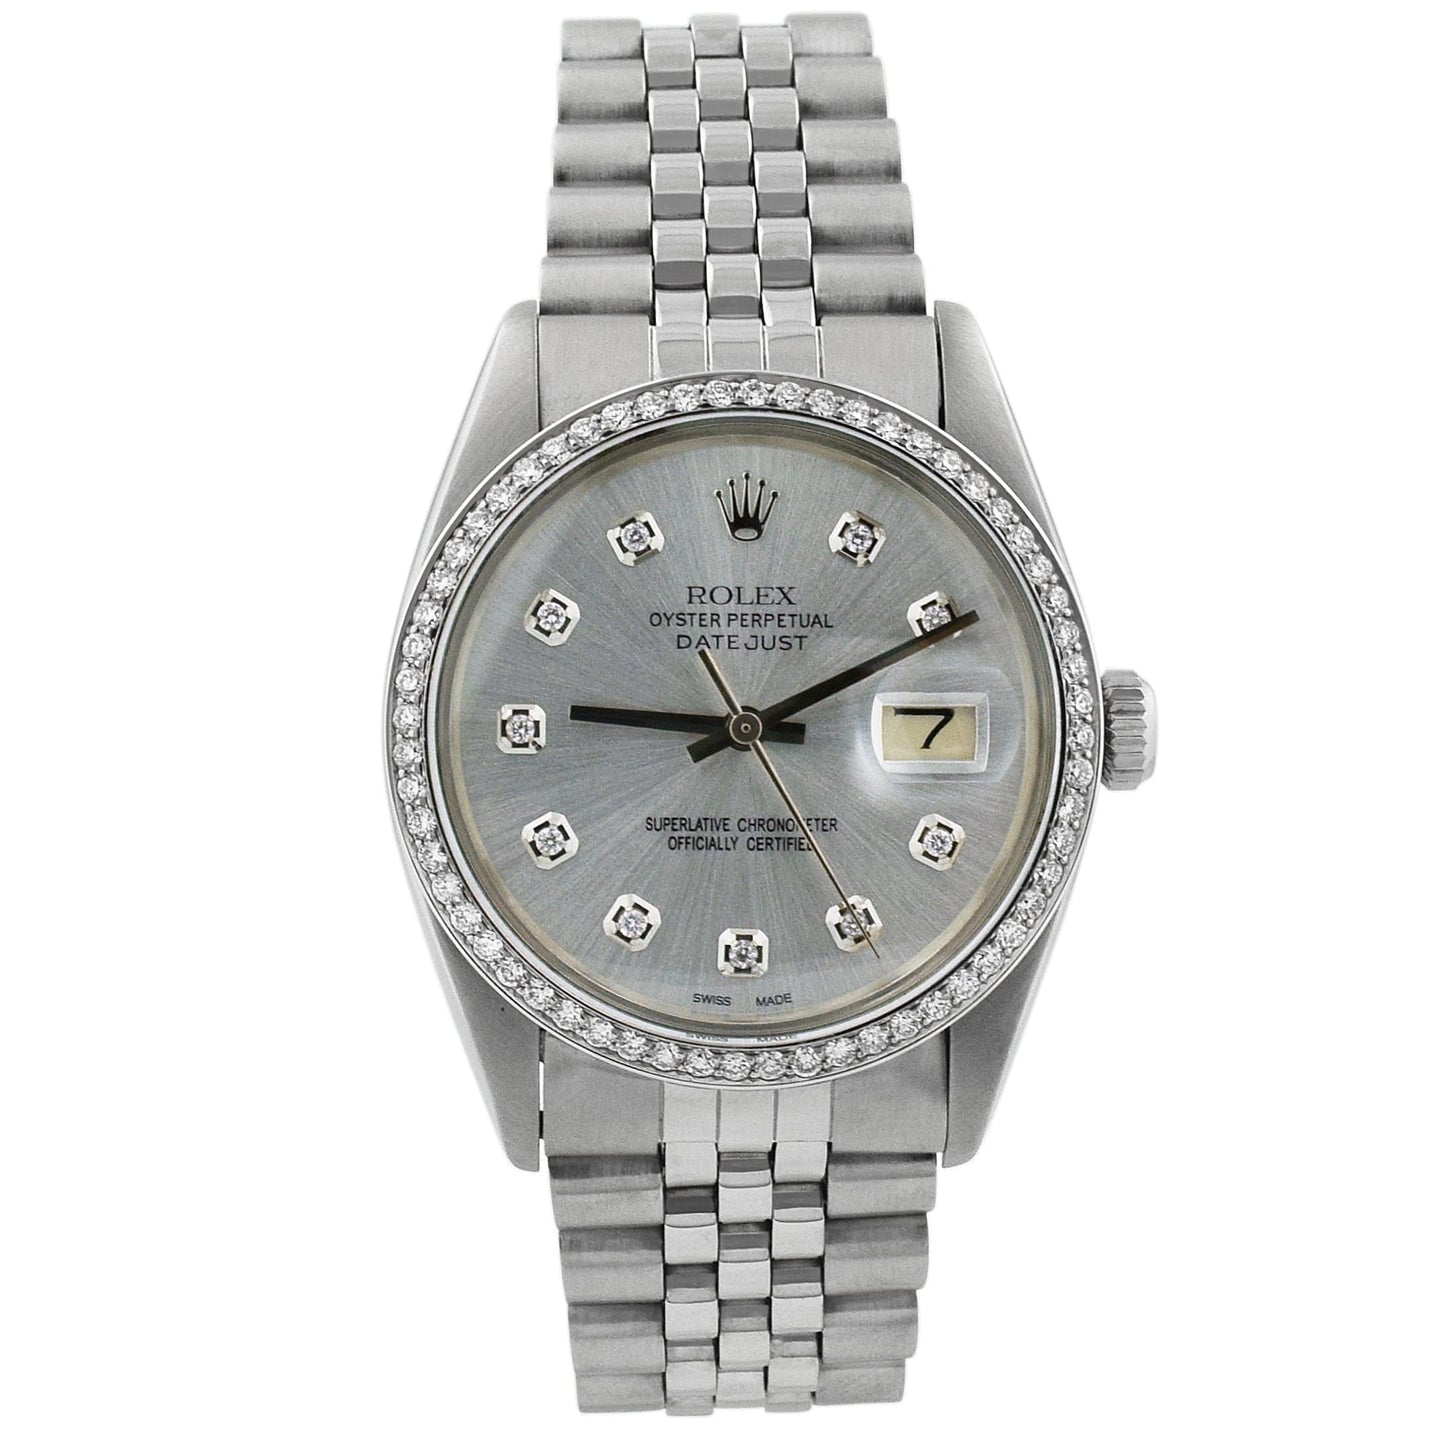 Rolex Datejust Stainless Steel 36mm Factory Diamond Dot Dial Watch Reference# 16014